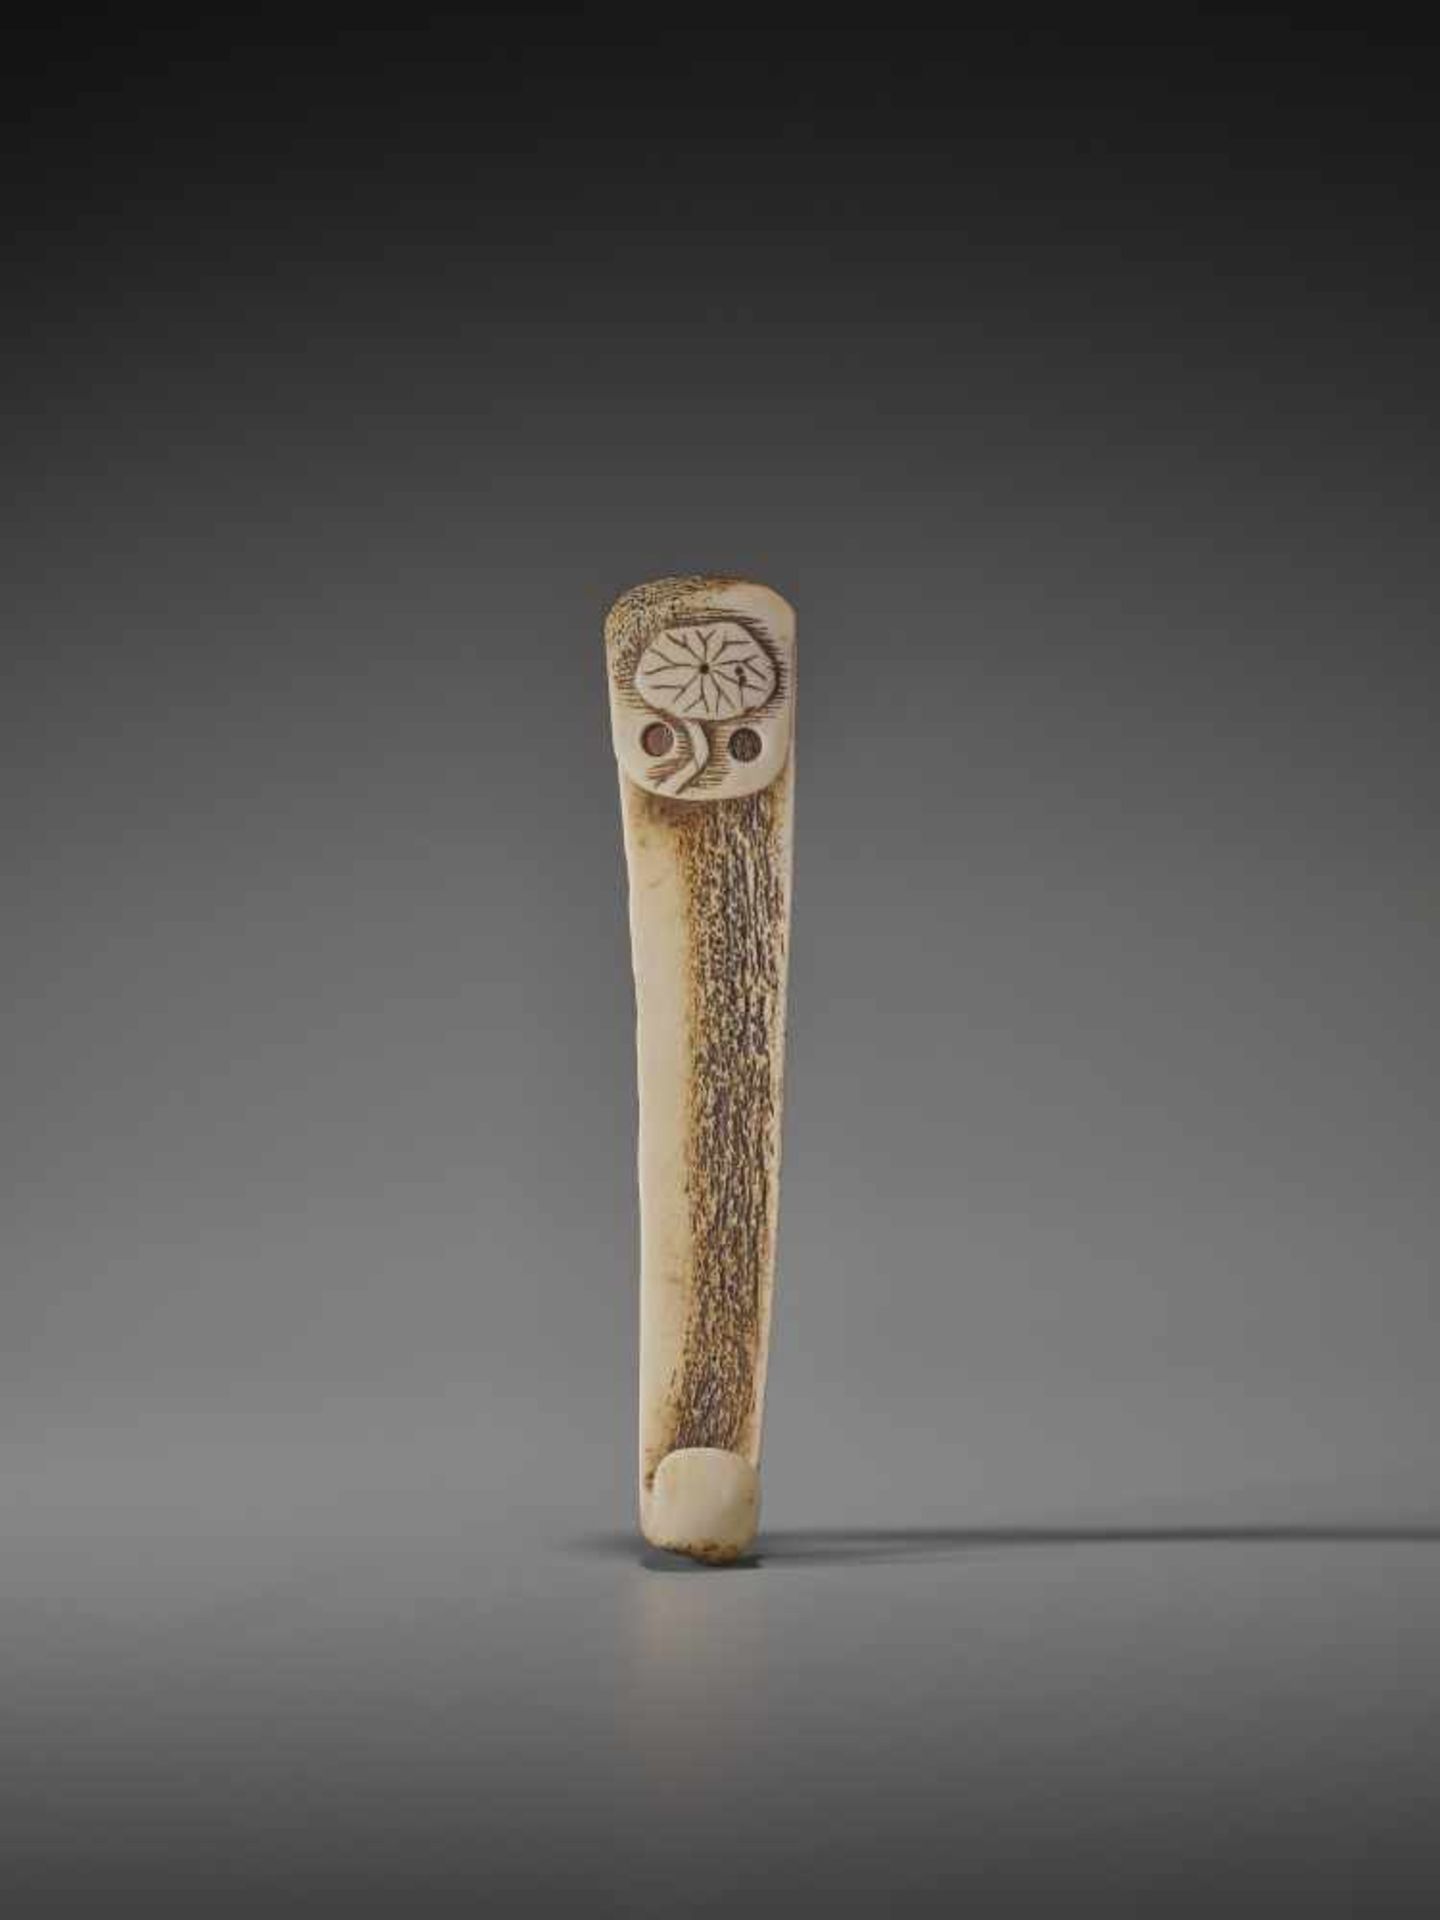 A STAG ANTLER OBI HASAMI NETSUKEUnsigned, stag antler obi hasami netsukeJapan, 19th century, Edo - Bild 2 aus 3